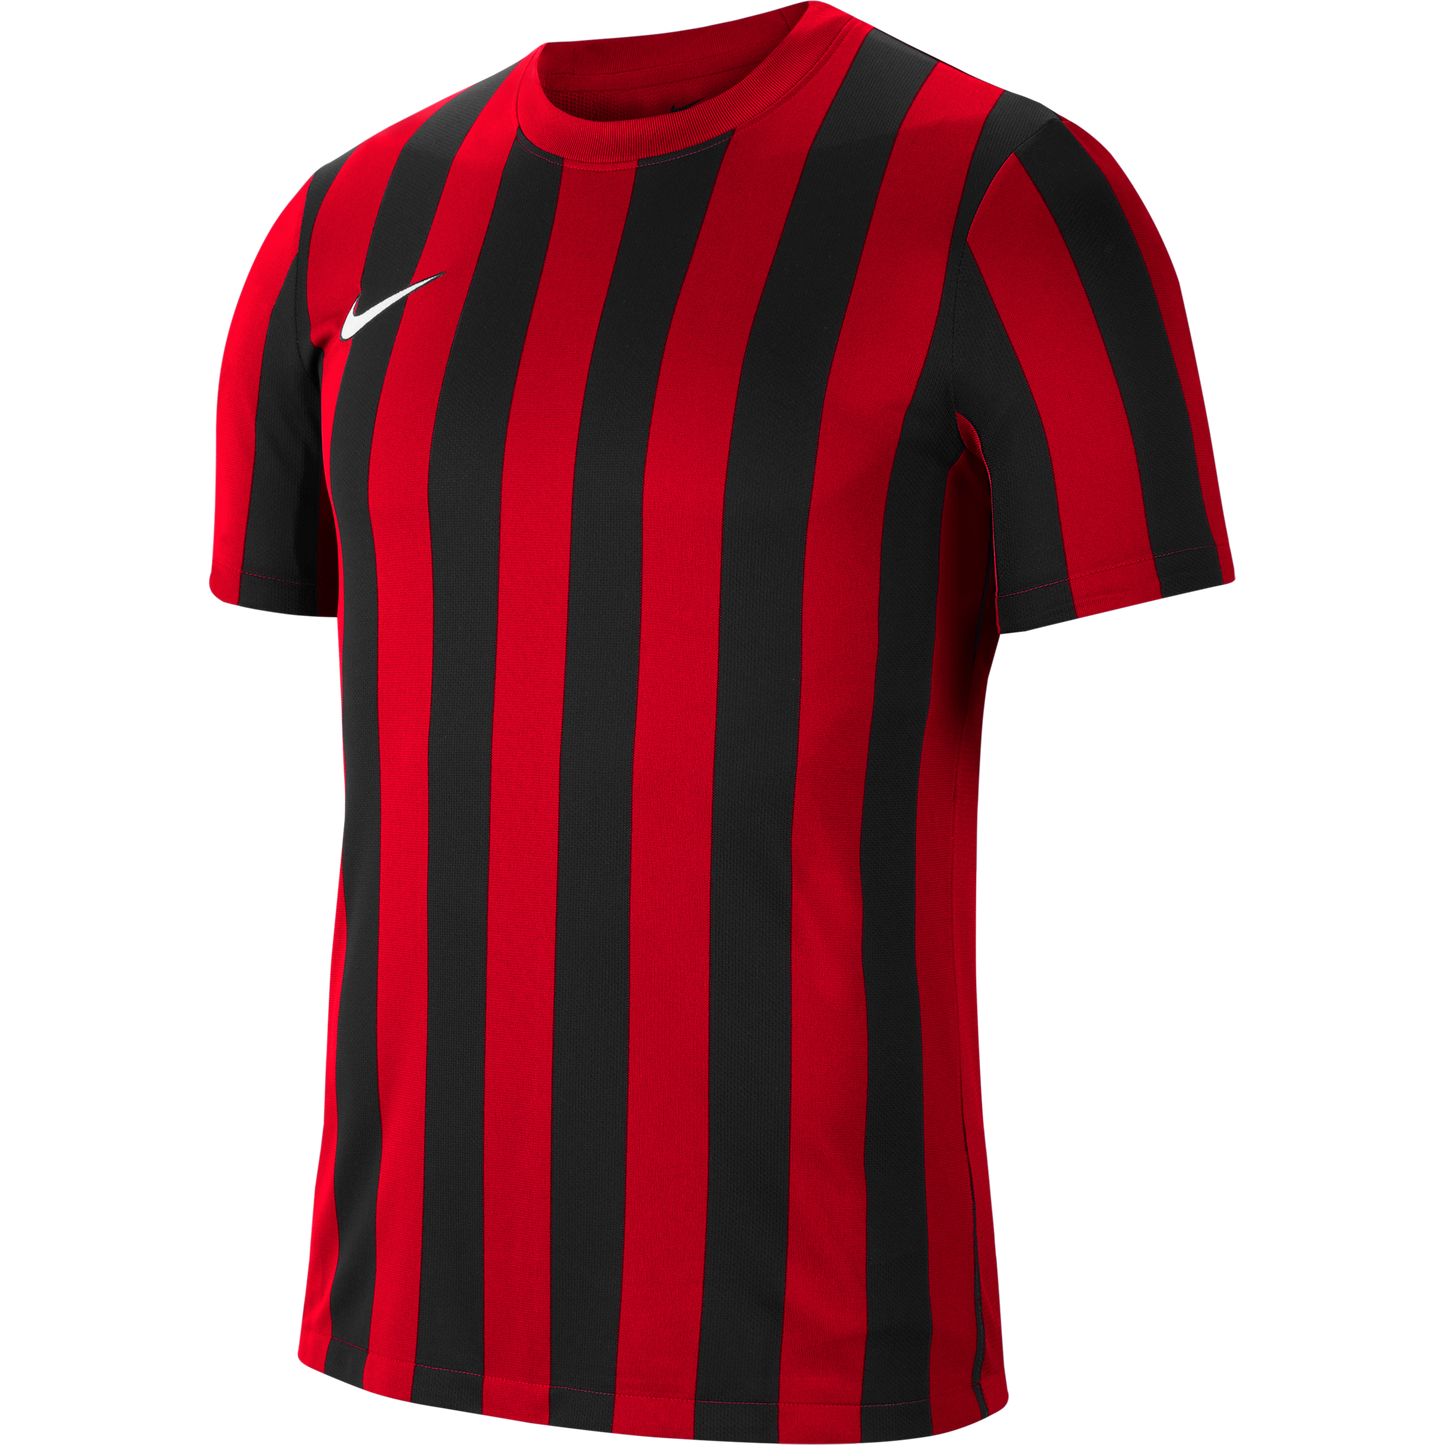 NIKE DIVISION IV JERSEY - YOUTHS